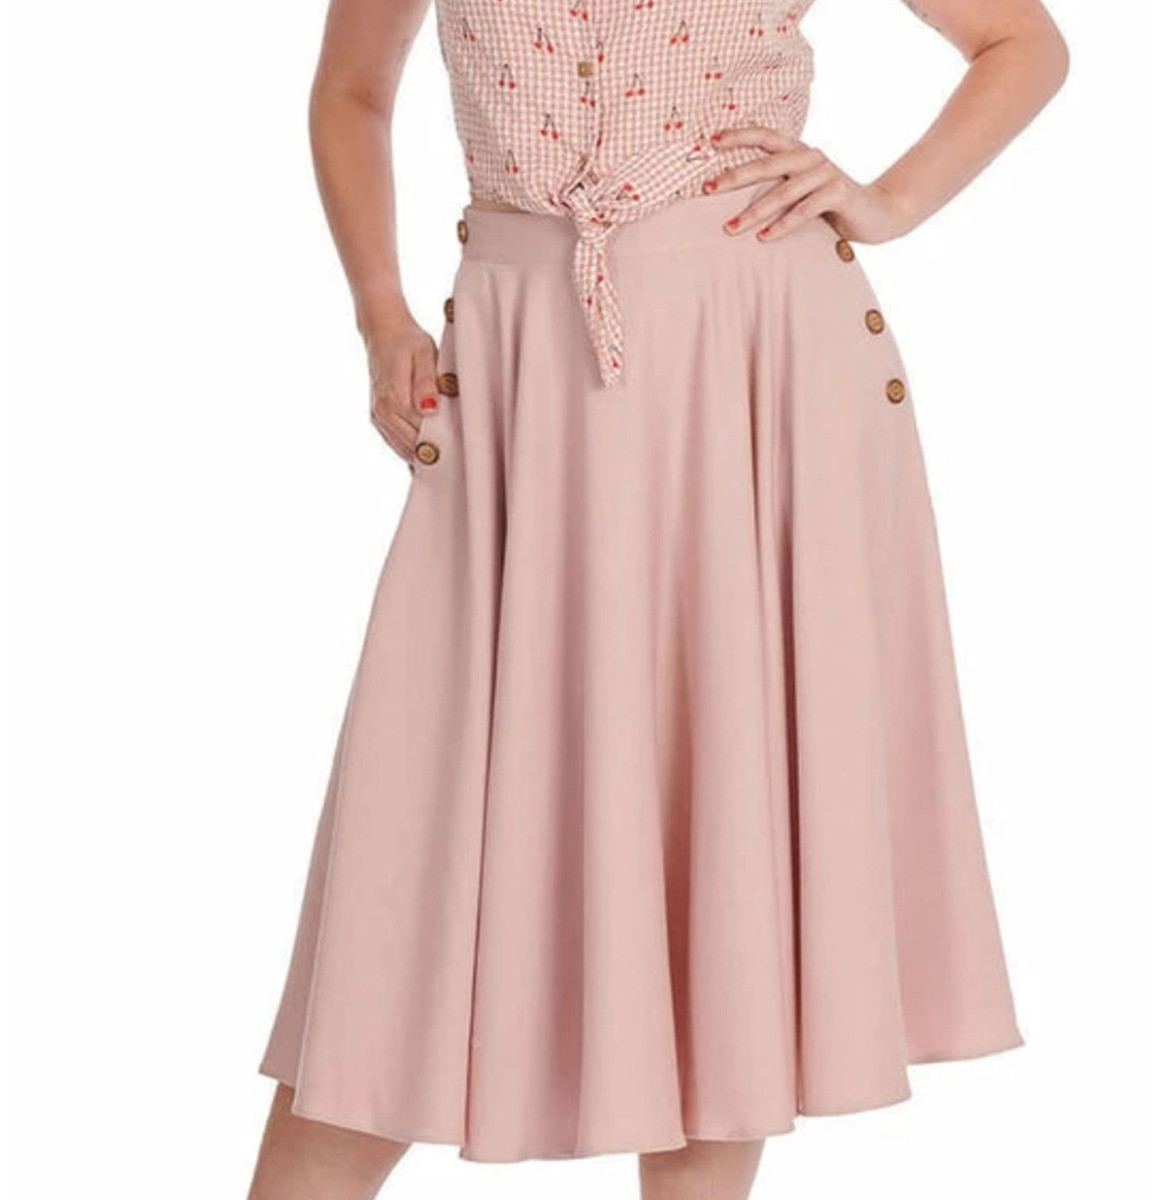 Banned Polly May Swing Skirt Pink -XXL